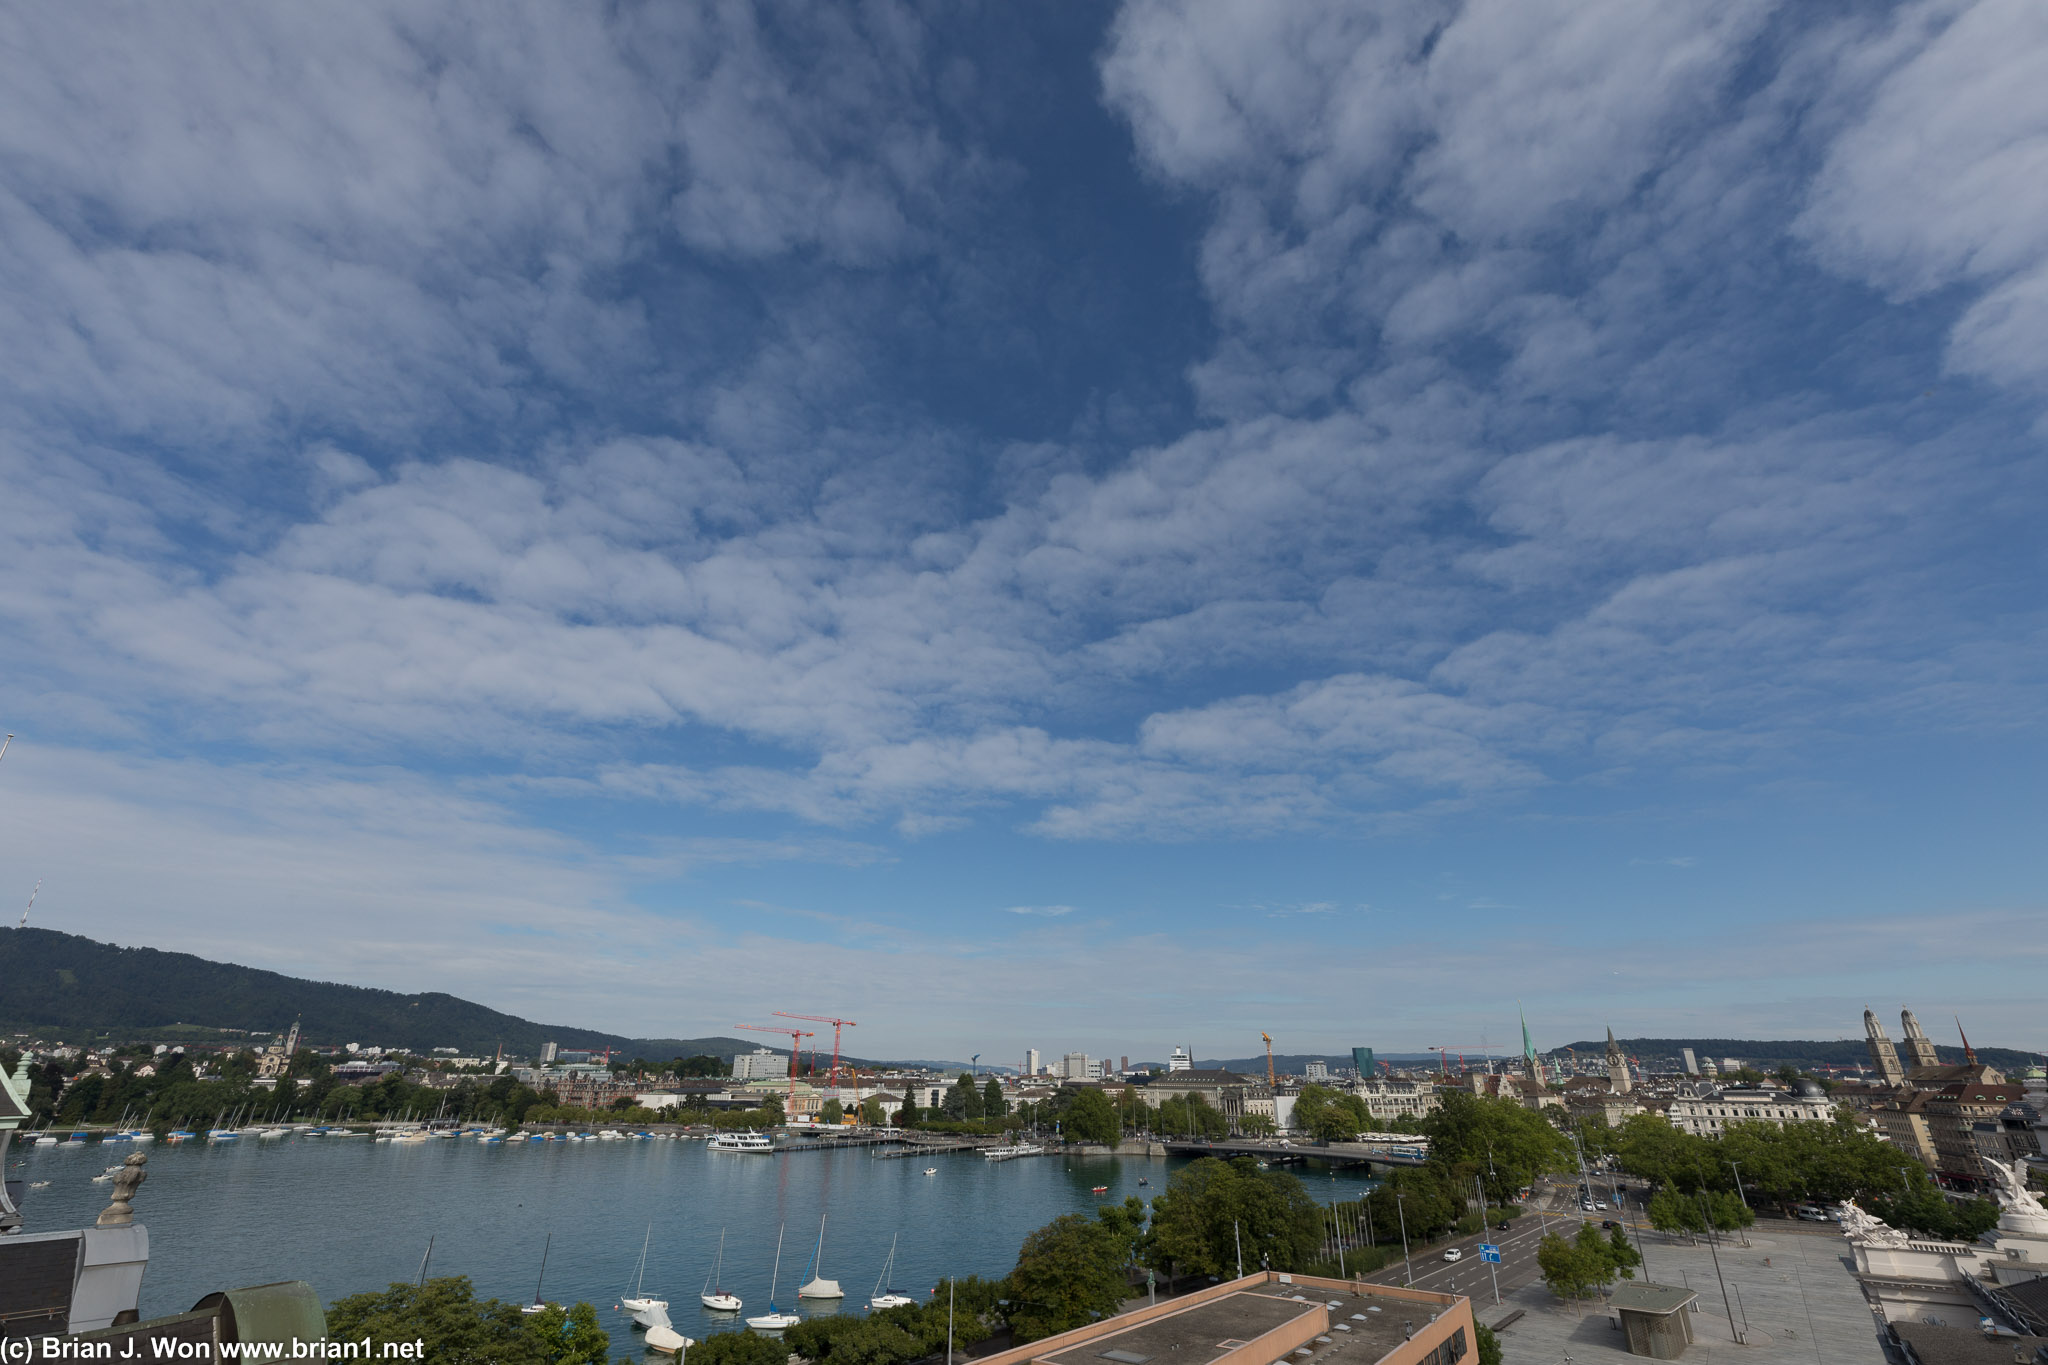 Great skies over Zurich from the Hotel Opera.